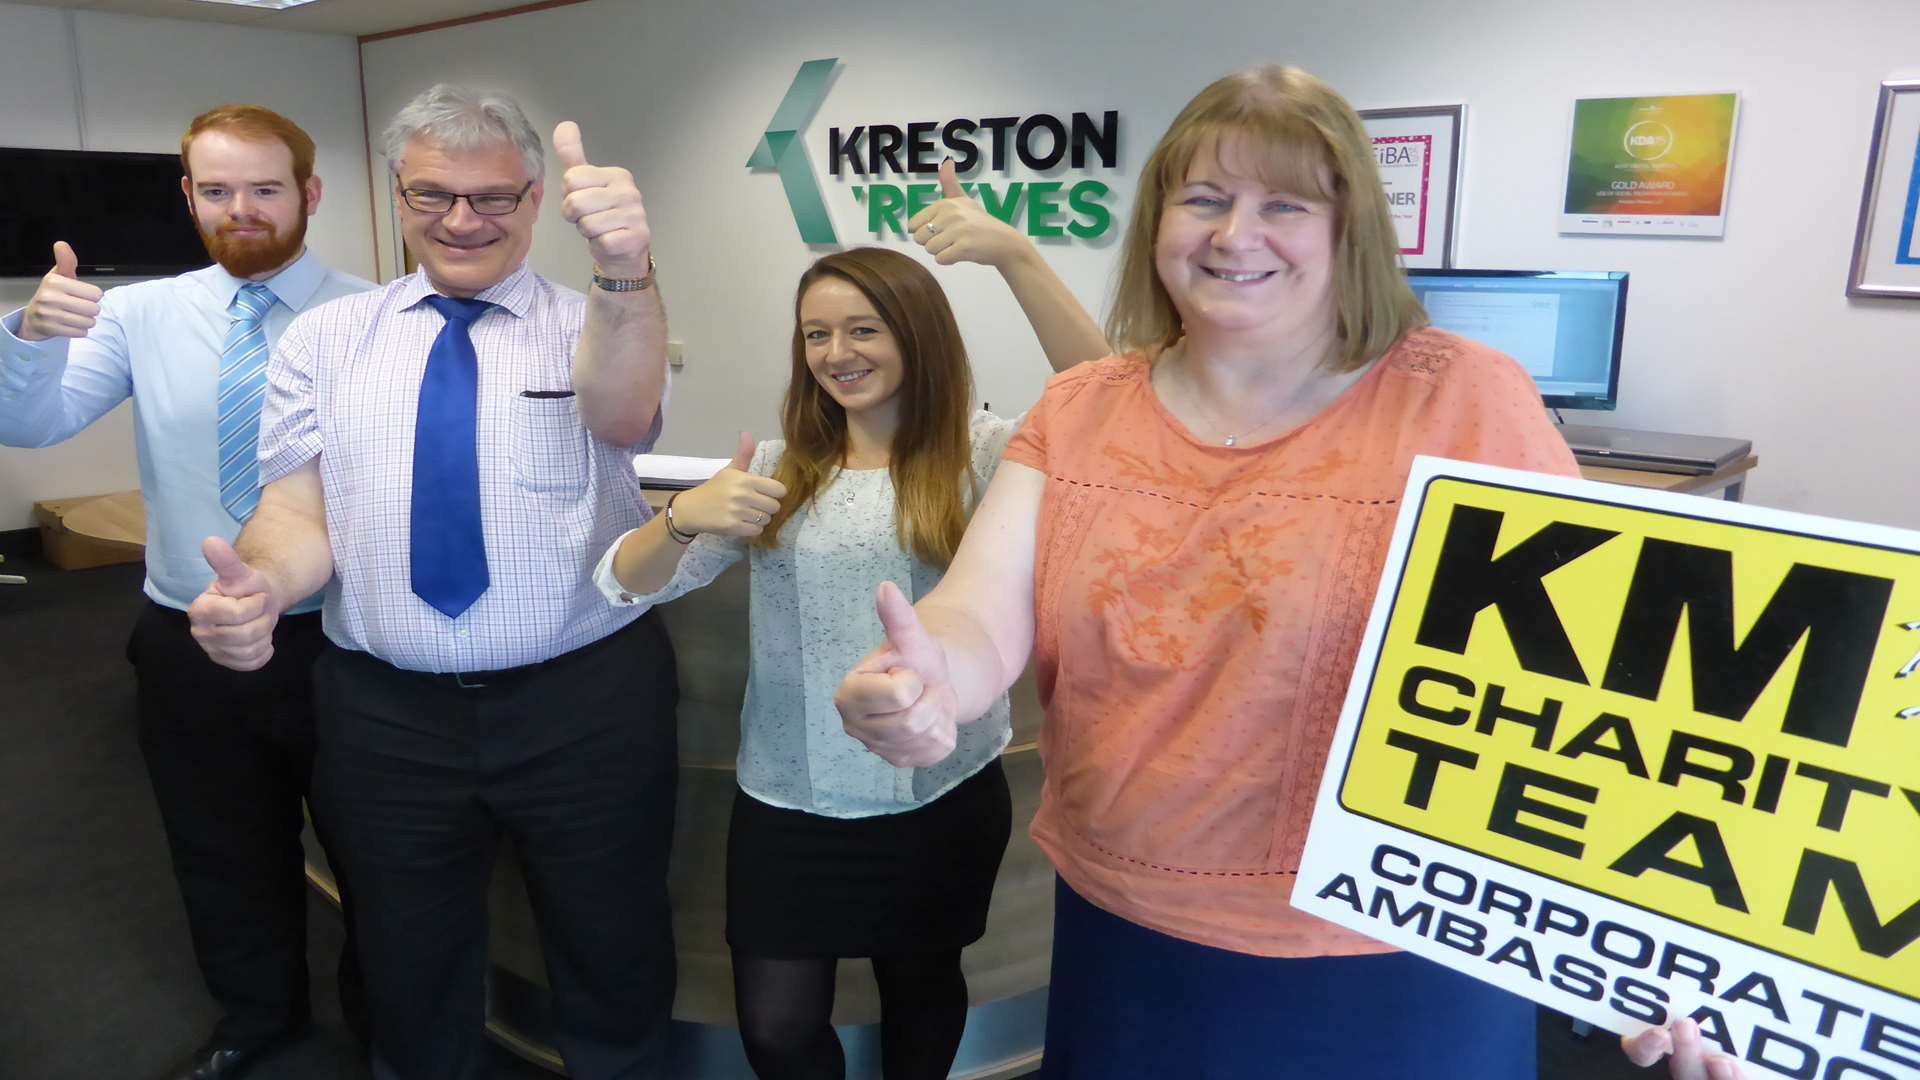 Susan Robinson and the Kreston Reeves team celebrate being named Corporate Ambassadors of the KM Charity Team following their support of the charity's annual Forum.